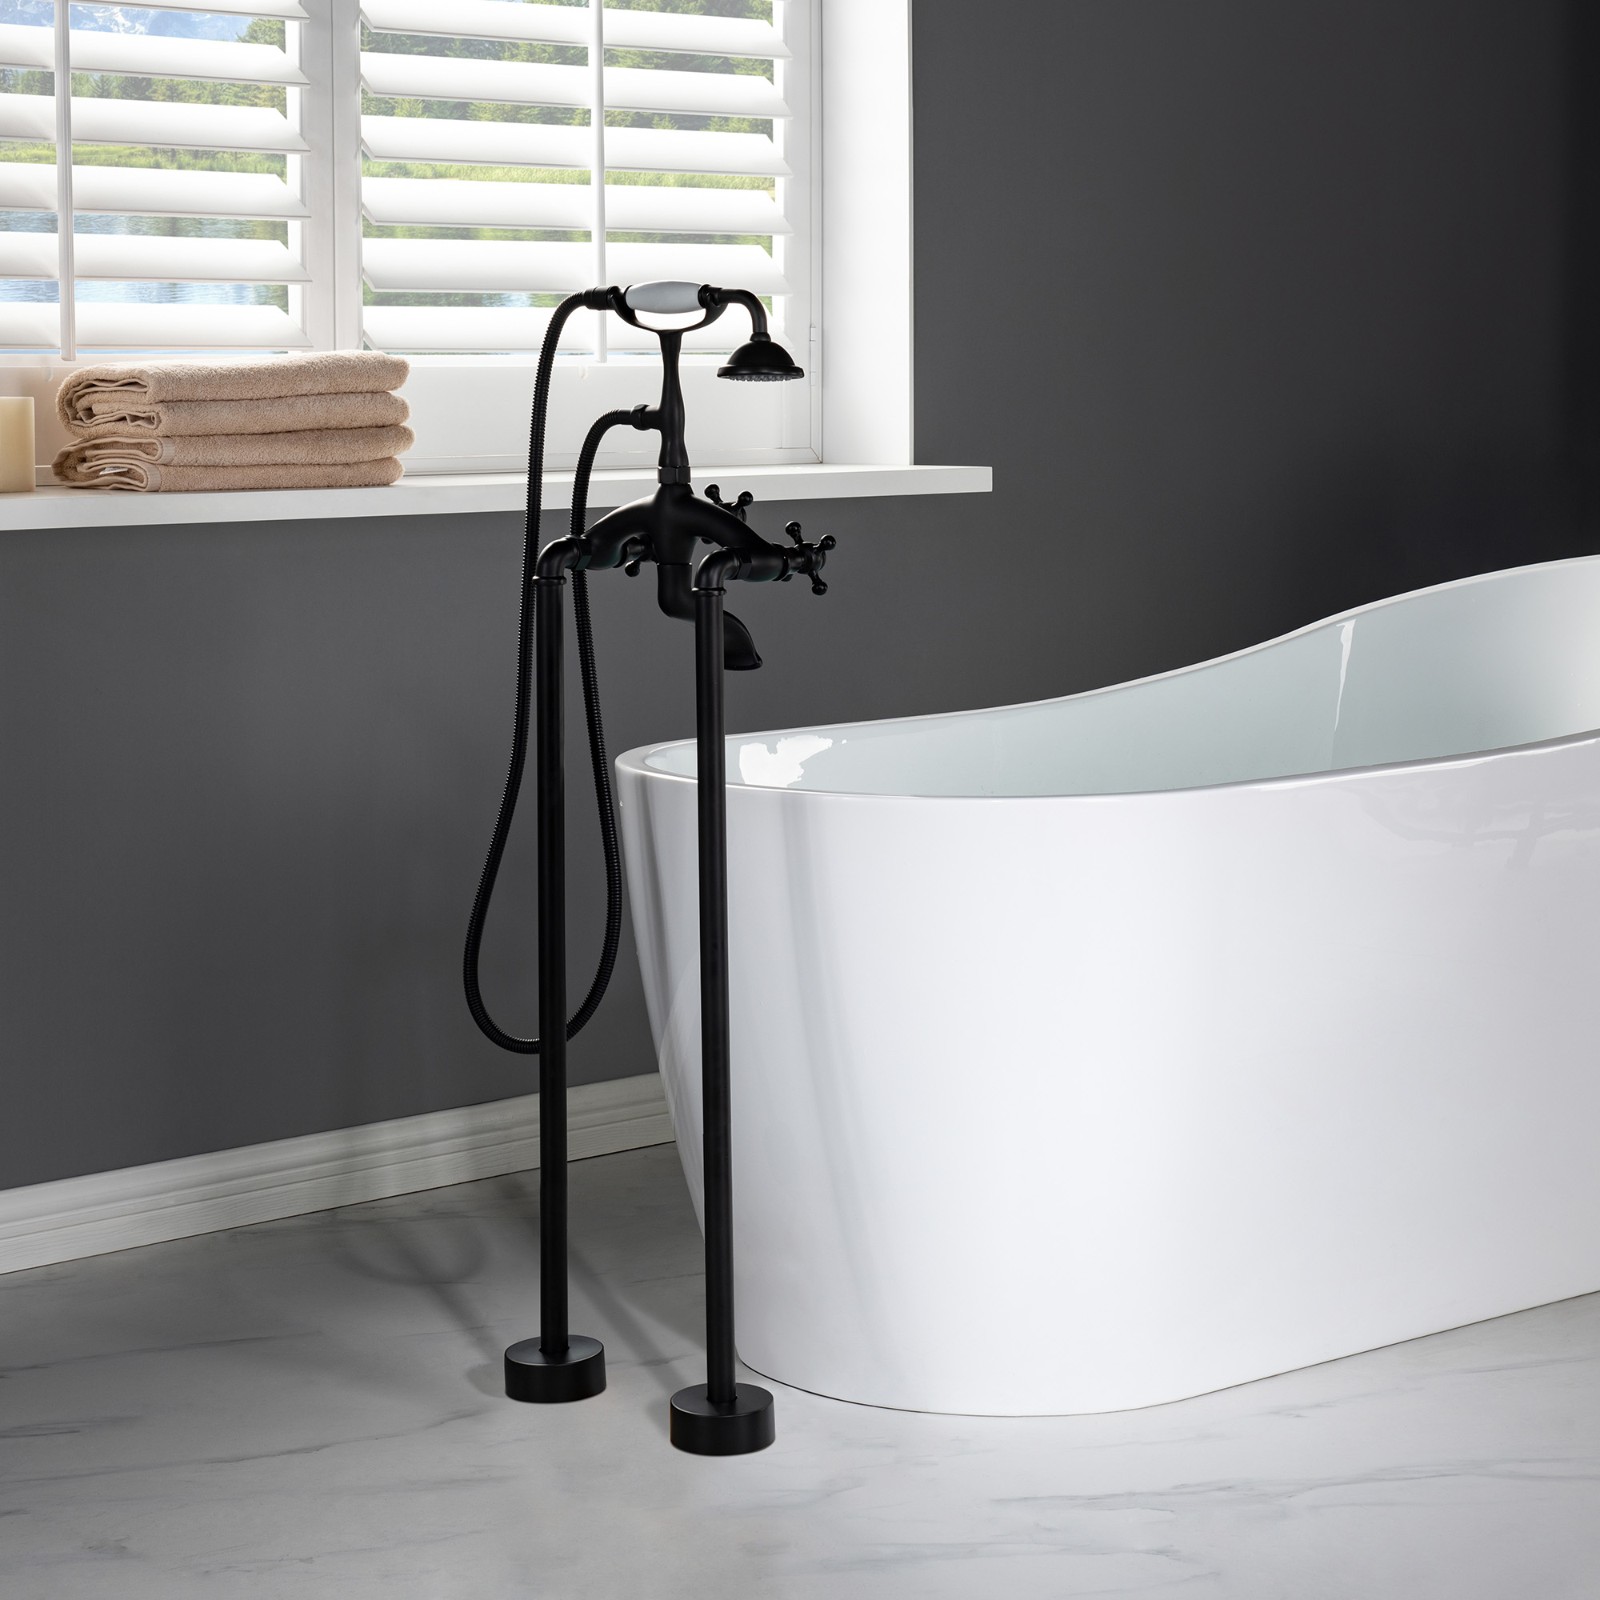  WOODBRIDGE F0020MB Freestanding Clawfoot Tub Filler Faucet with Hand Shower and Hose in Matte Black_5405